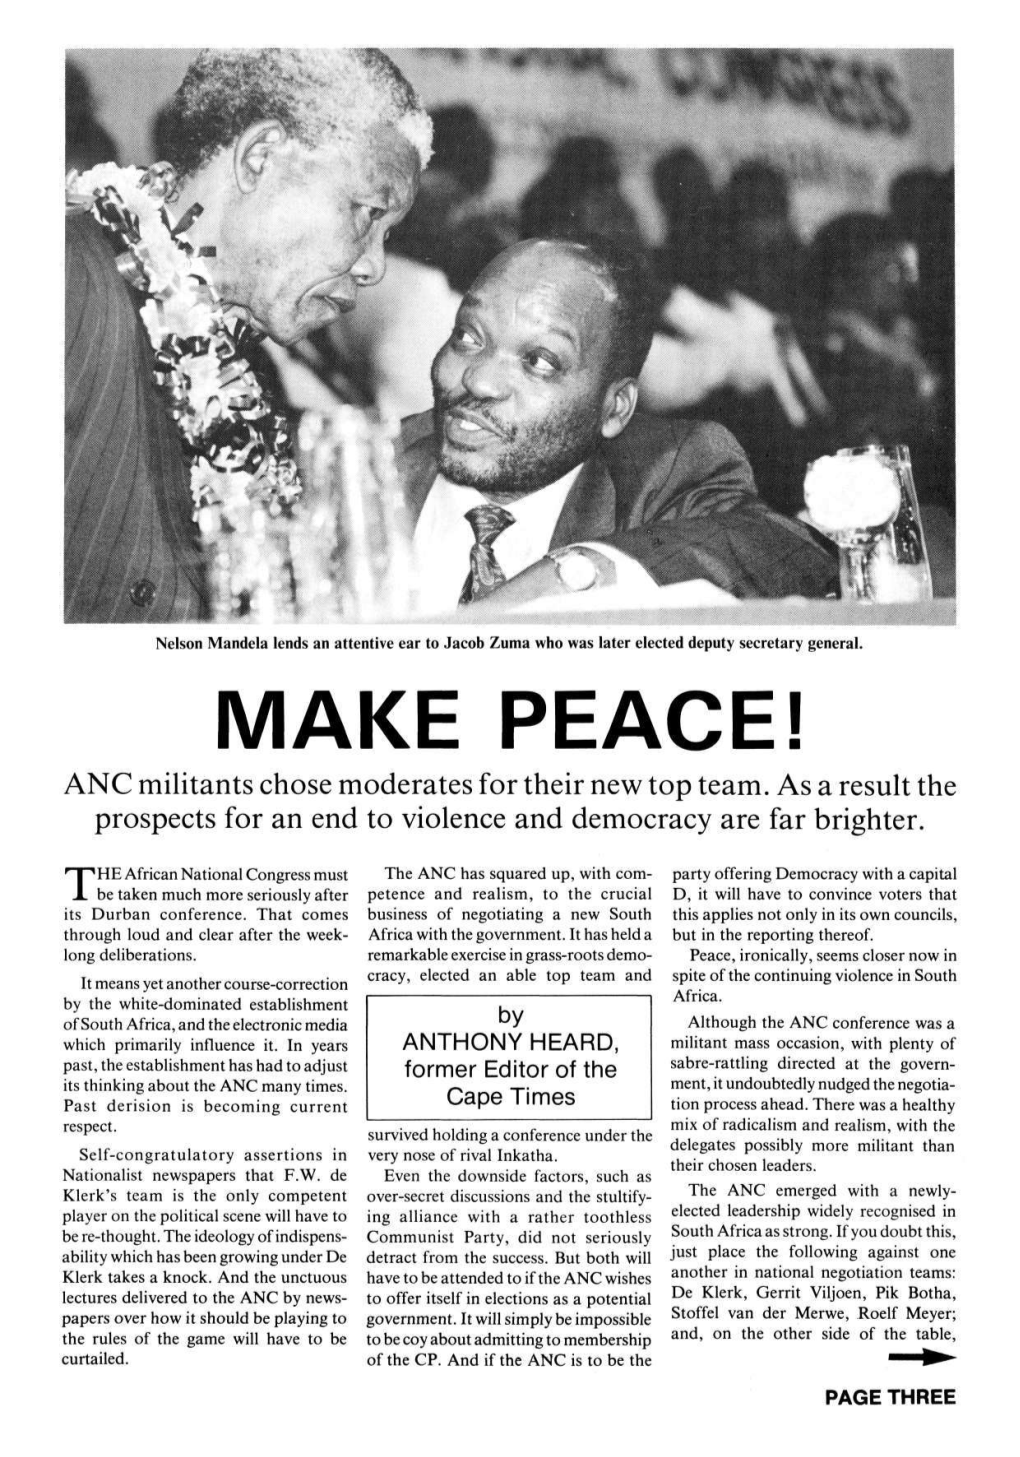 MAKE PEACE! ANC Militants Chose Moderates for Their New Top Team